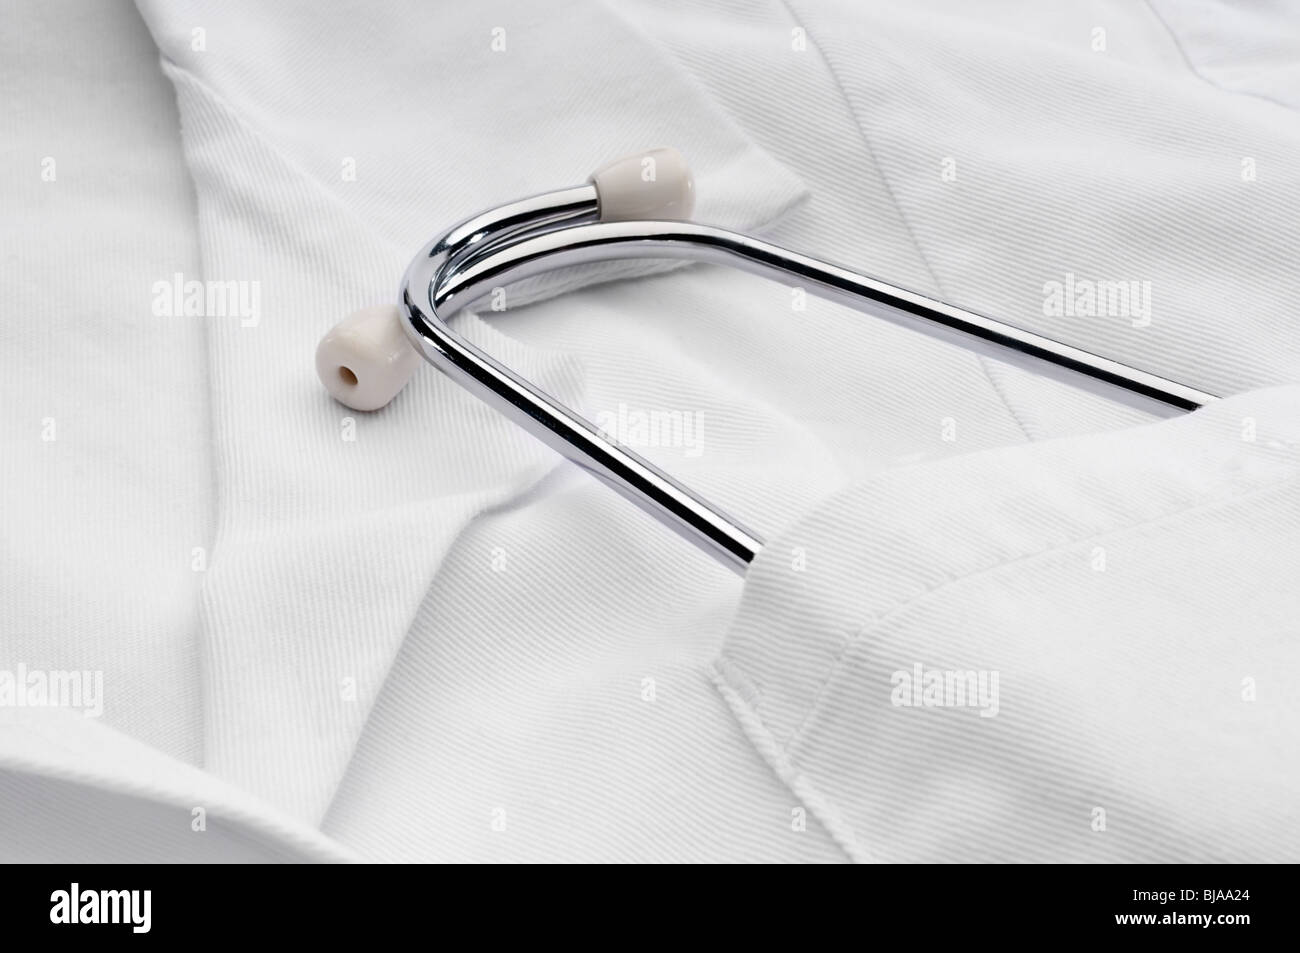 A stethoscope in the pocket of a doctor's white medical lab coat Stock Photo